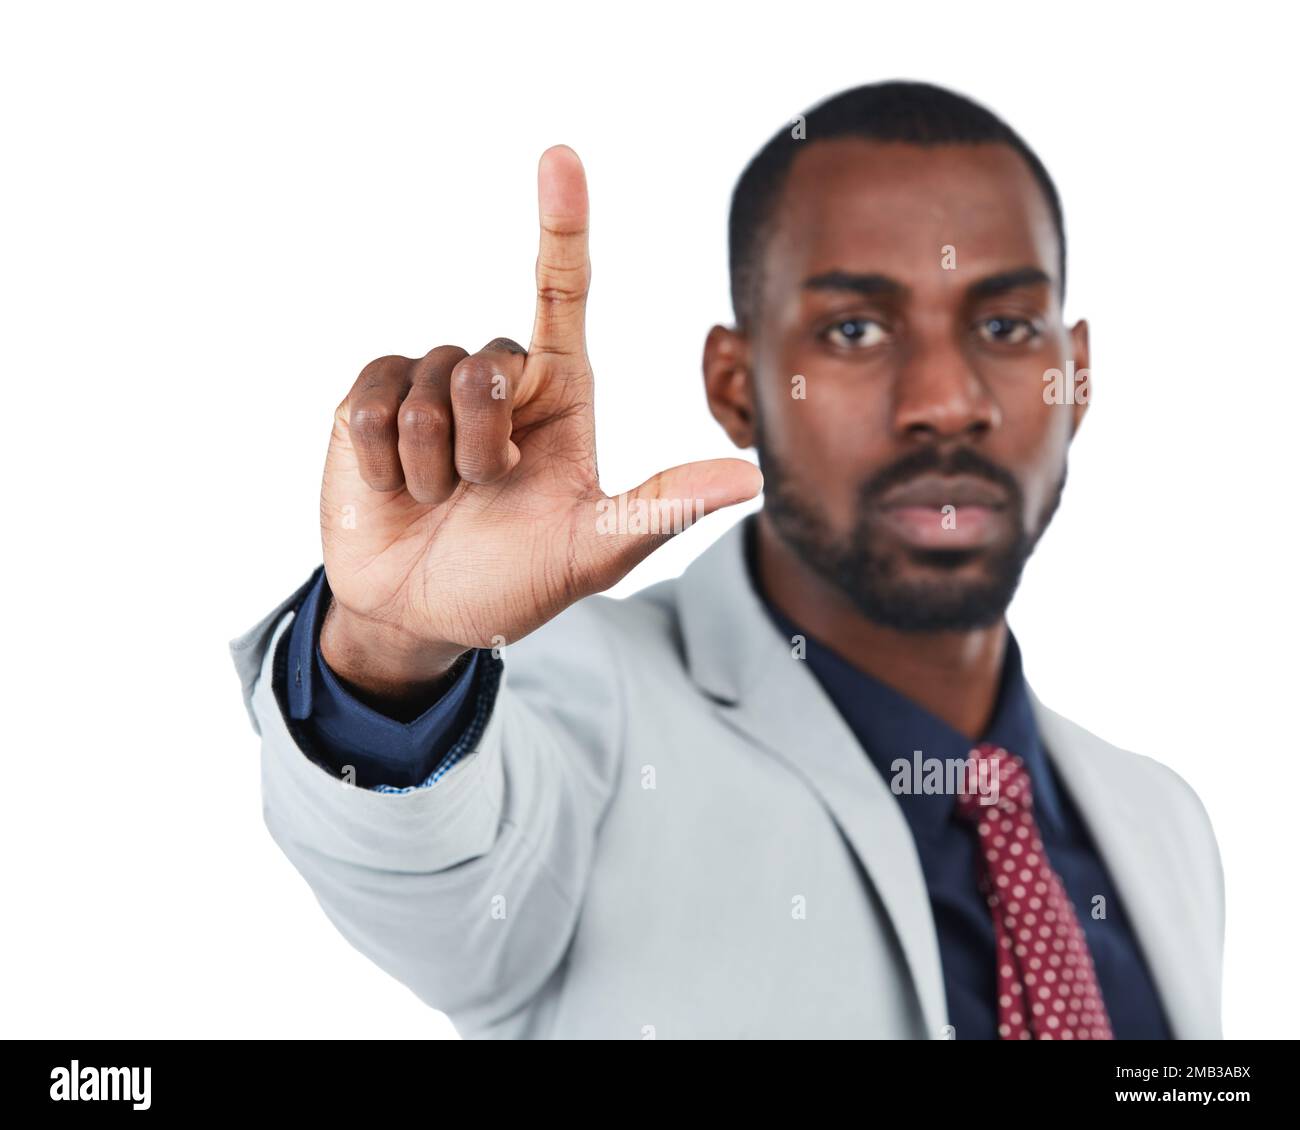 hand-loser-and-fail-with-a-business-black-man-in-studio-isolated-on-a-white-background-to-gesture-an-l-sign-social-media-emoji-and-review-with-a-2MB3ABX.jpg